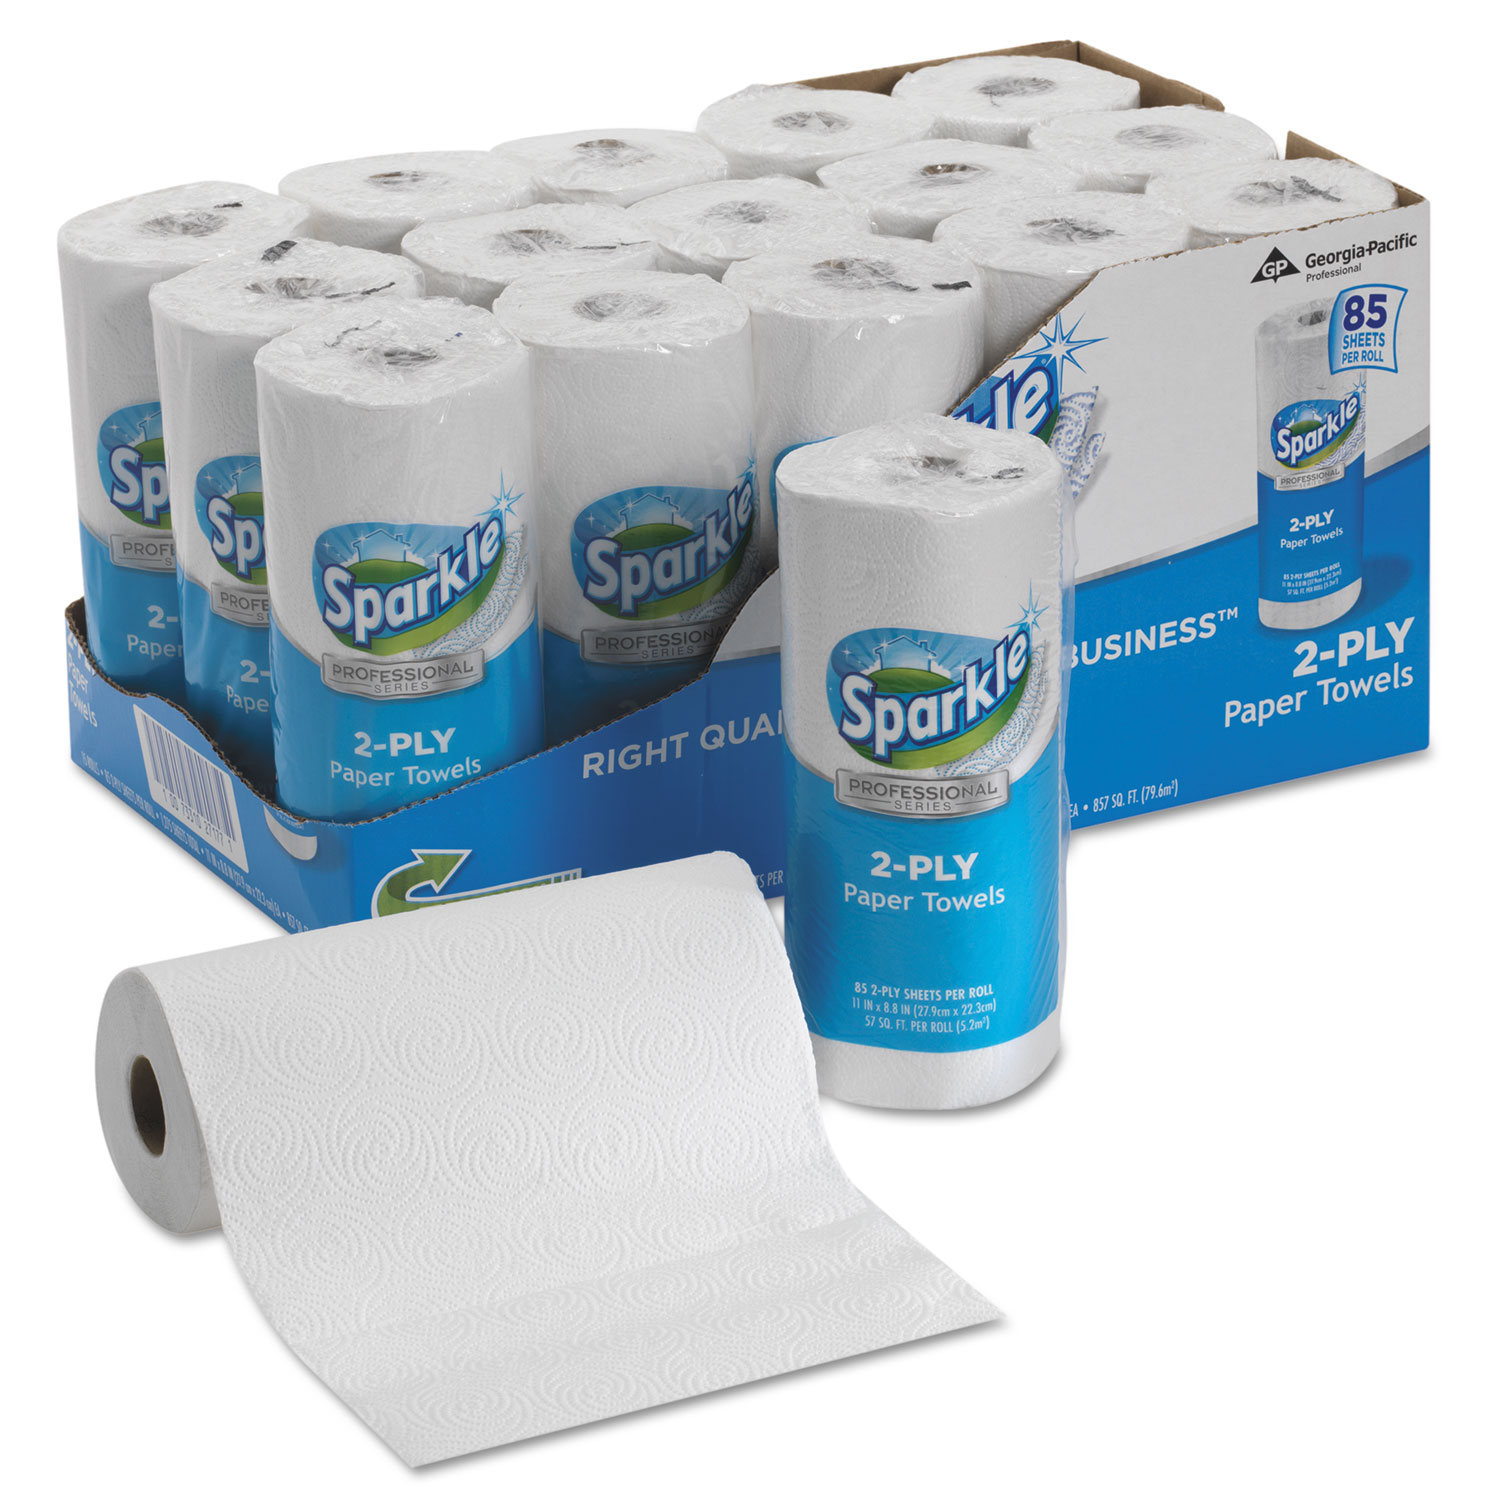 Sparkle ps Perforated Paper Towel, White, 8 4/5 x 11, 85/Roll, 15 Roll/Carton